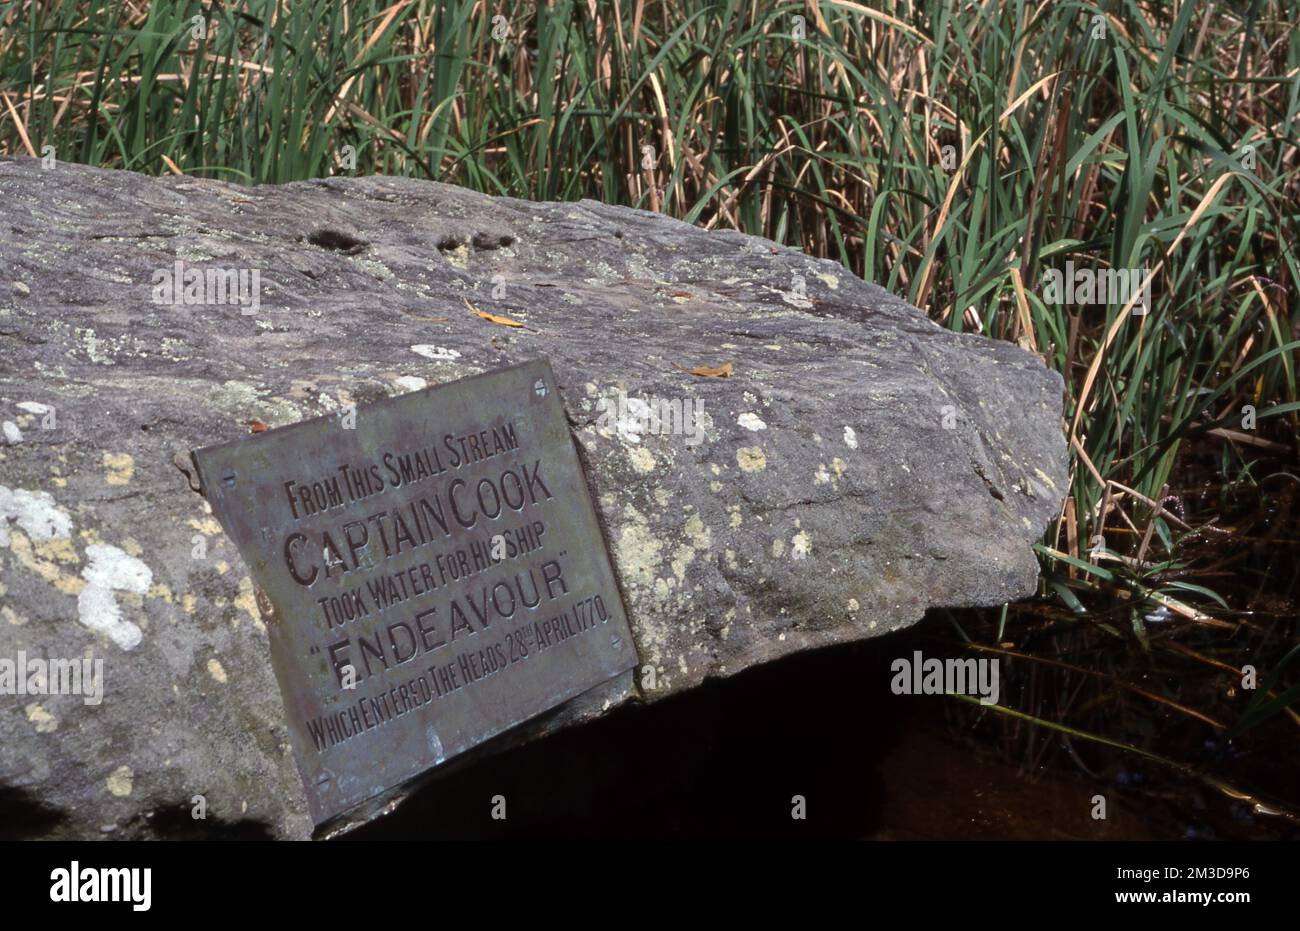 COMMEMORATIVE TABLET TO CAPTAIN COOK WHO FROM THIS SMALL STREAM TOOK WATER FOR HIS SHIP THE 'ENDEAVOUR' 1770. BOTANY BAY, NEW SOUTH WALES. AUSTRALIA Stock Photo